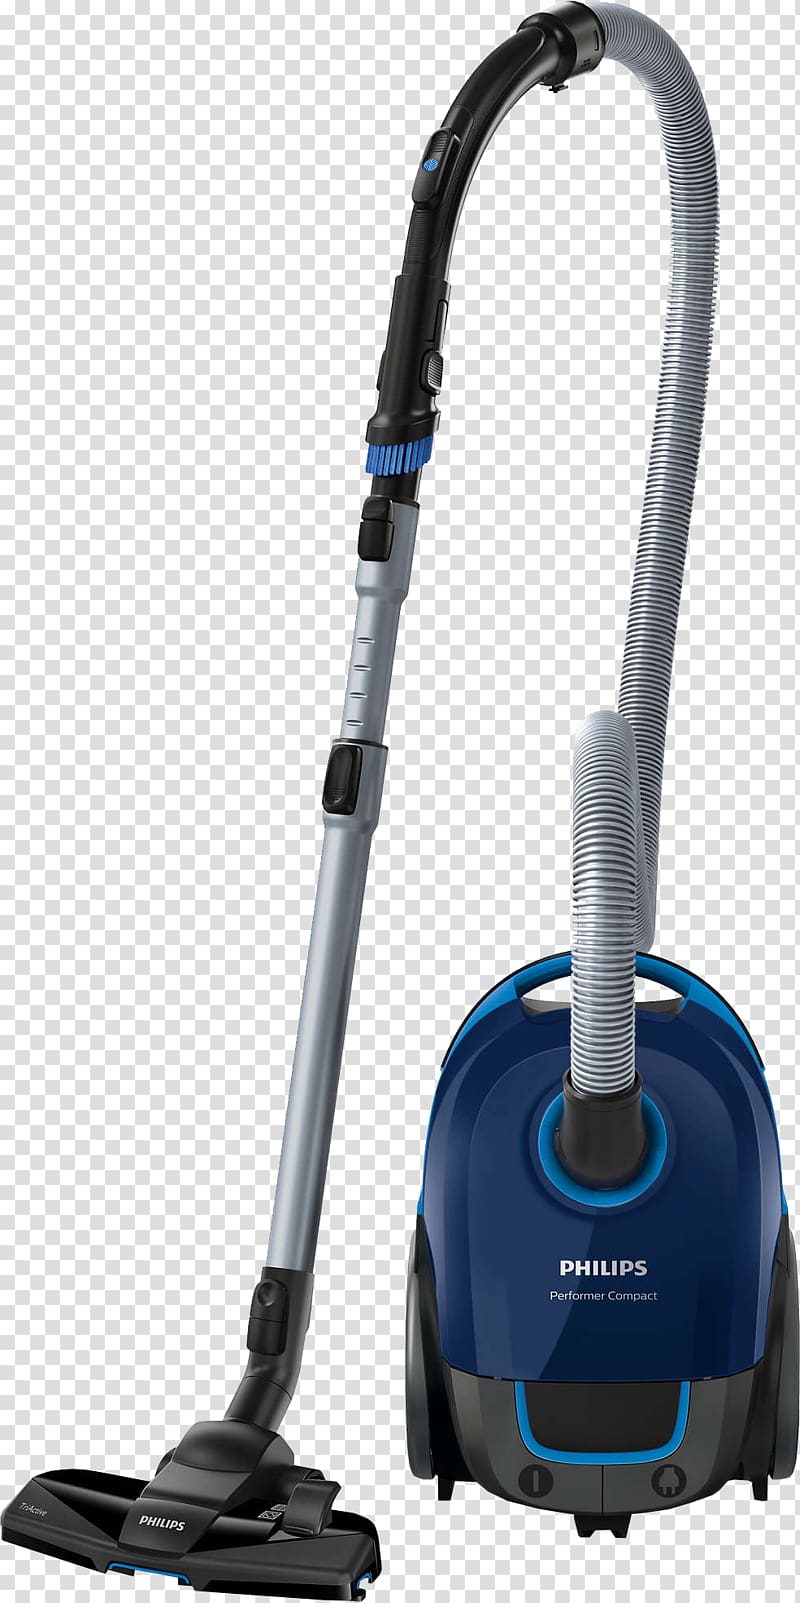 Vacuum cleaner Philips Performer Compact Philips PowerLife FC8322 Home appliance, vacuum cleaner transparent background PNG clipart